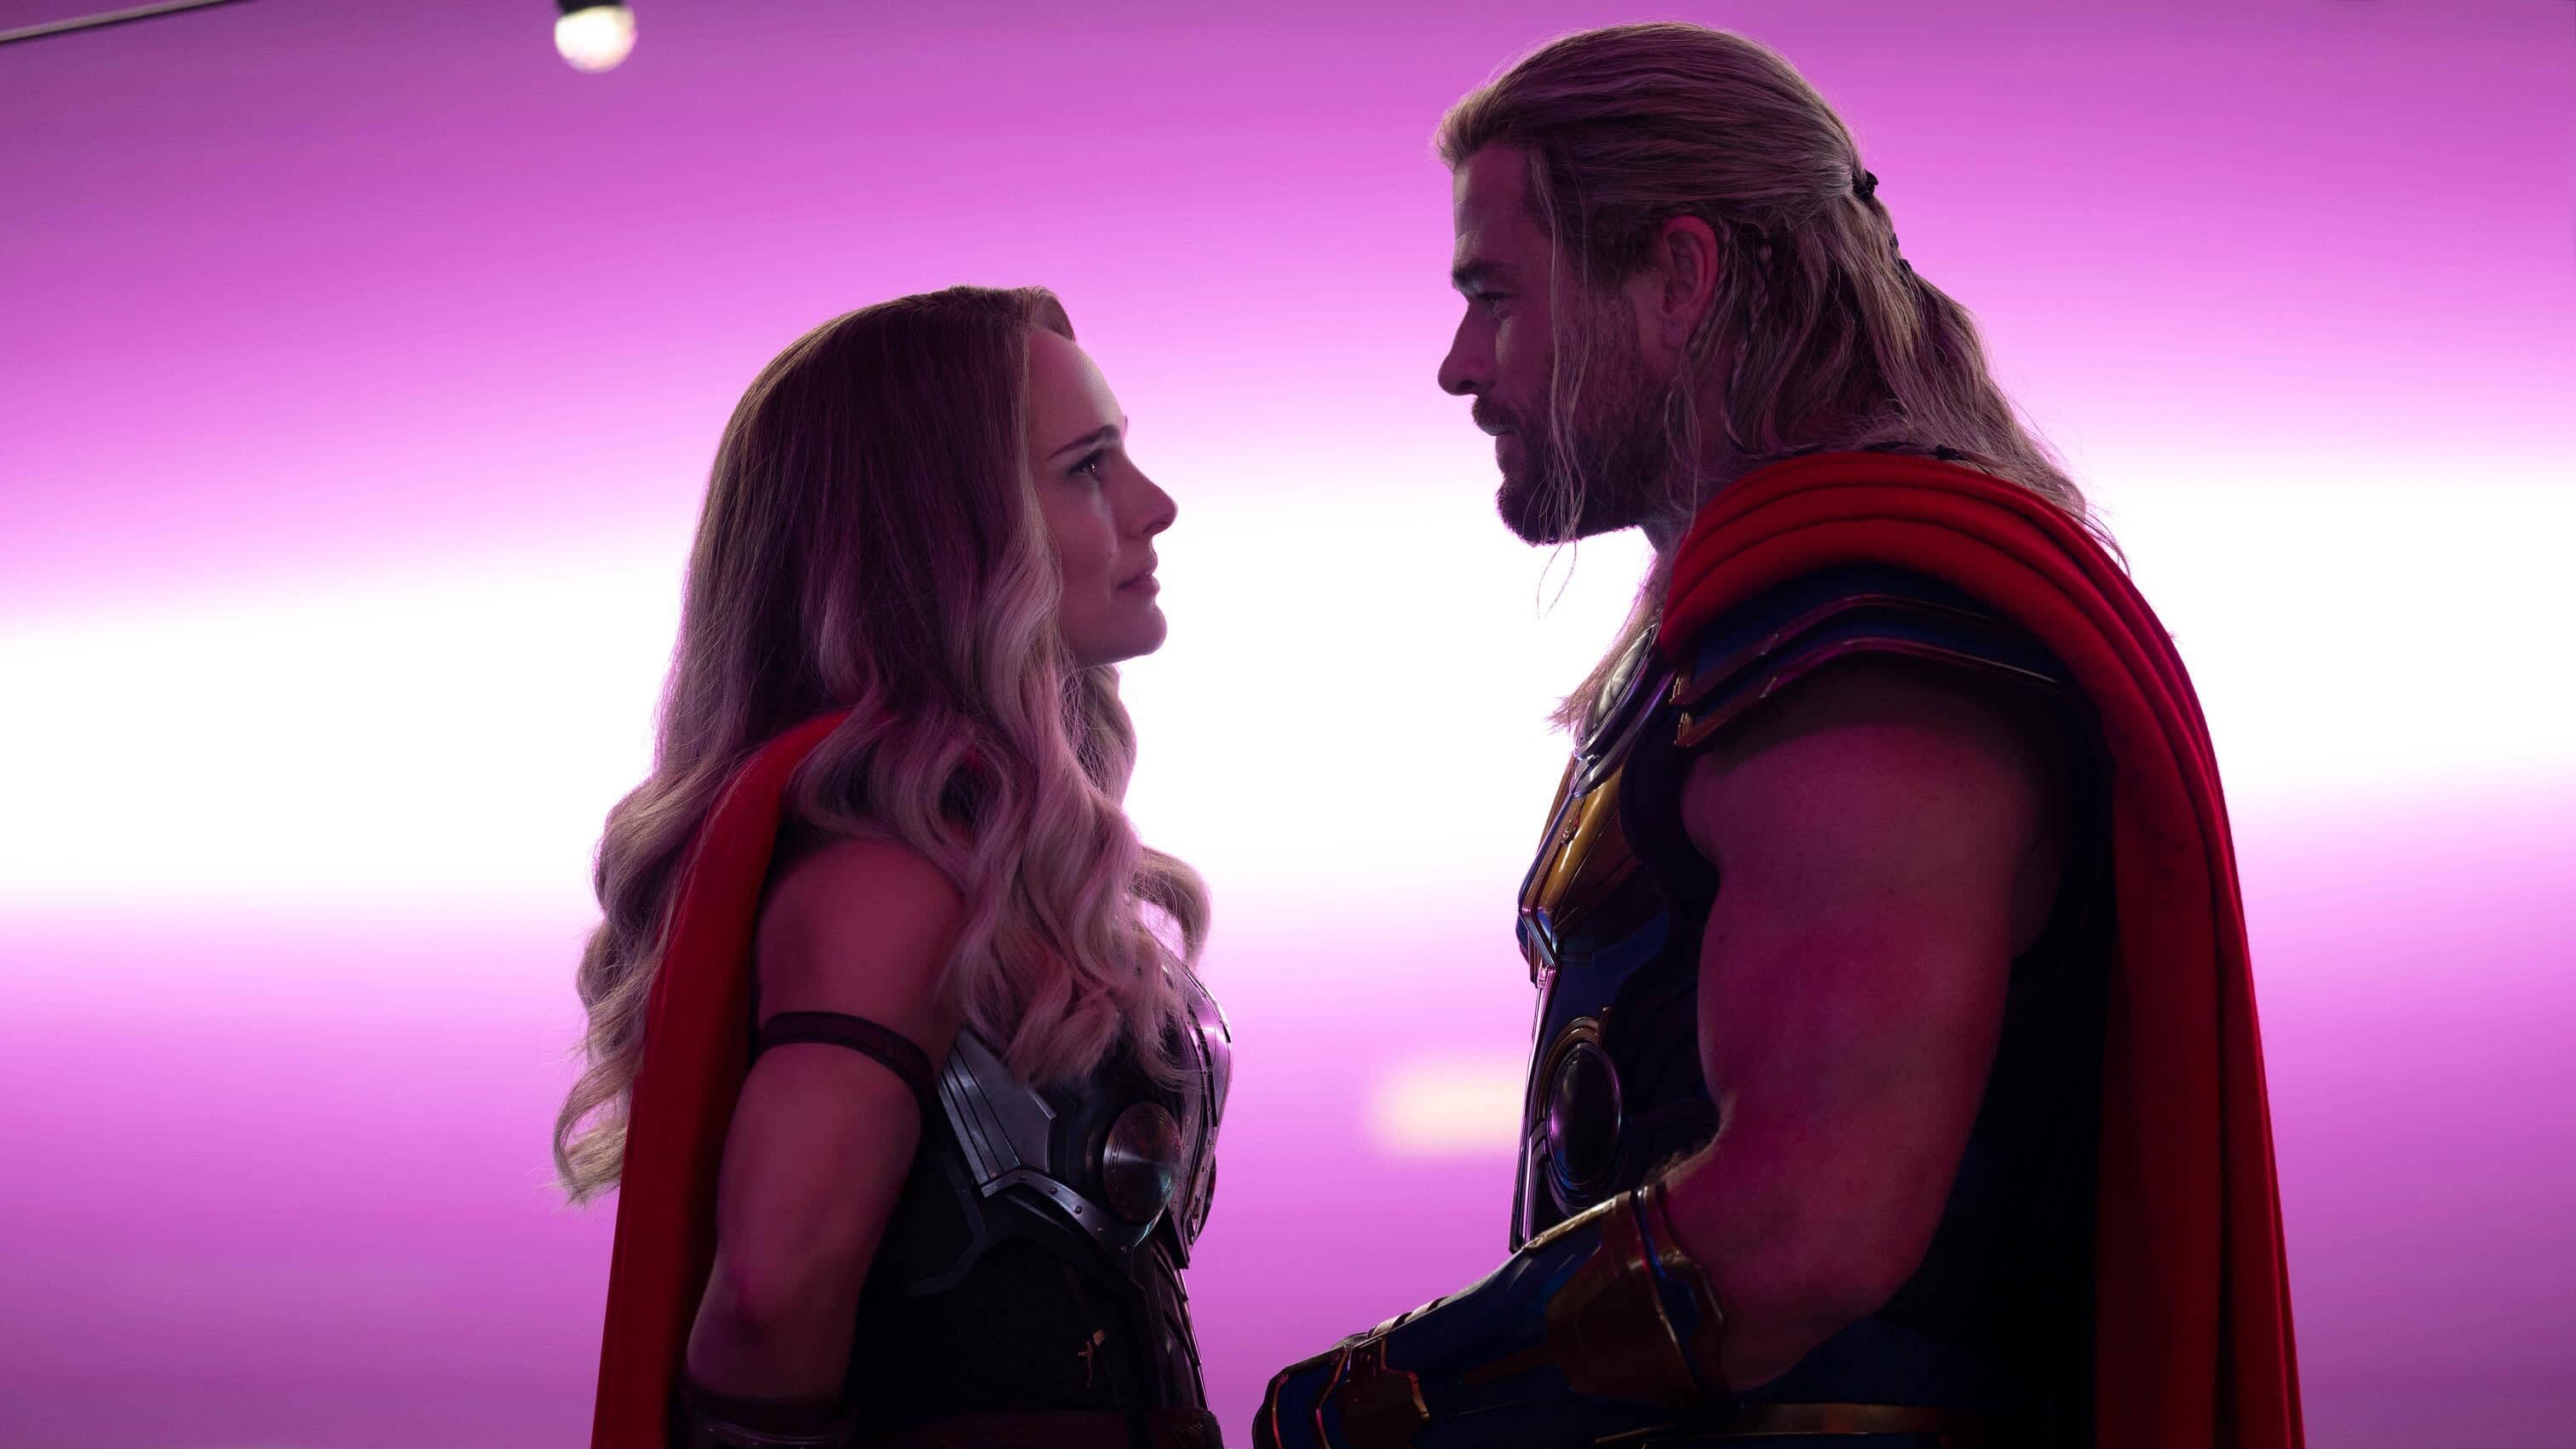 Thor: Love and Thunder Opens To $143 Million At the Box Office